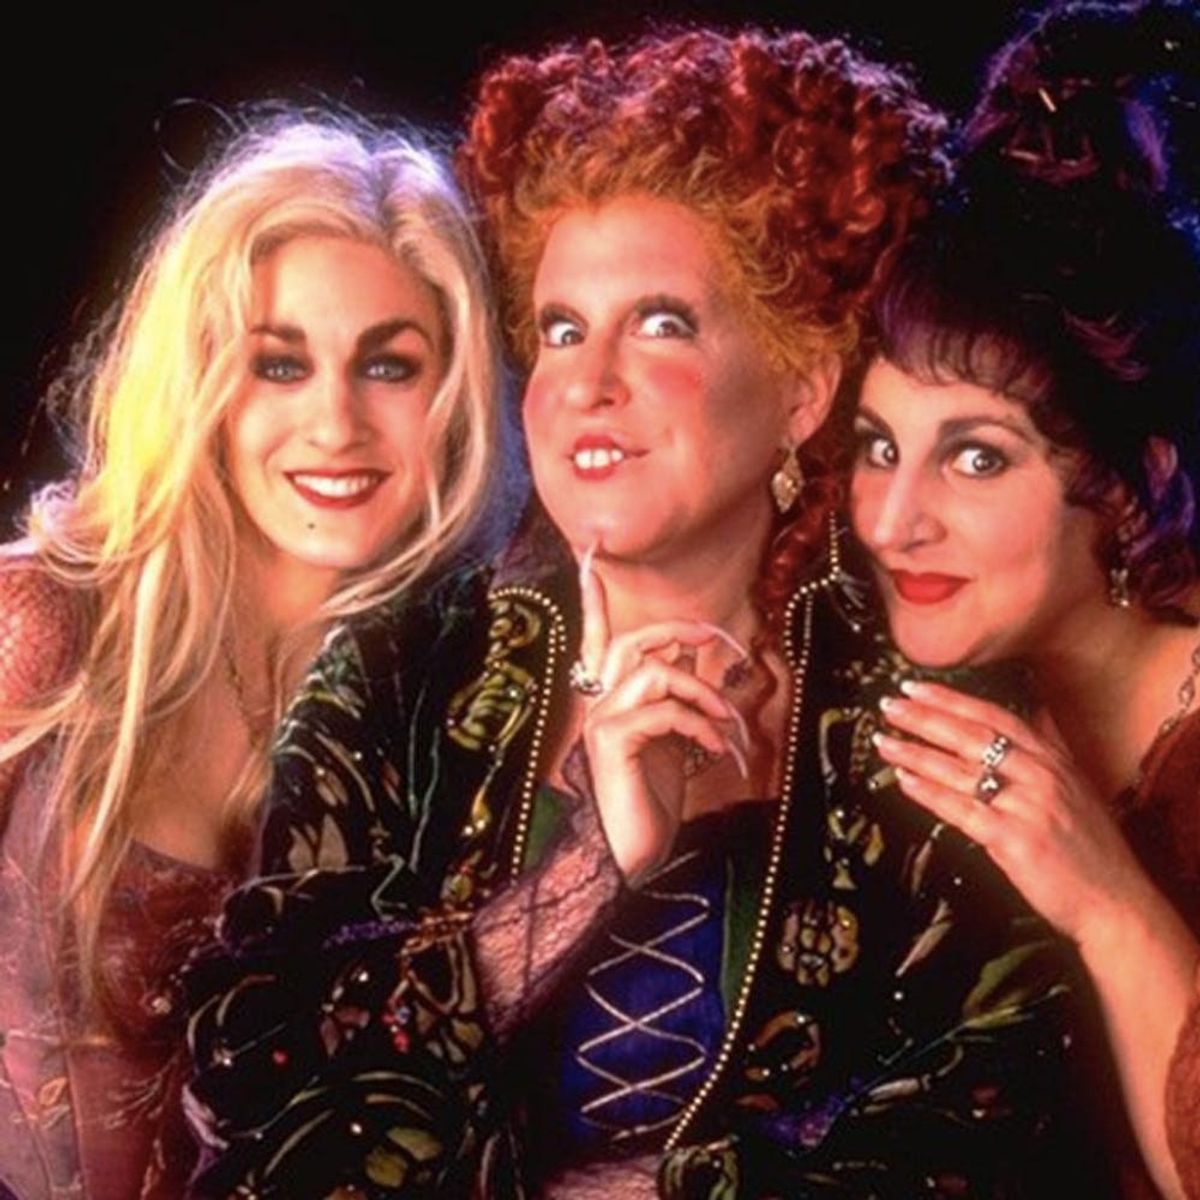 Bette Midler Has Some Harsh Words for the Upcoming “Hocus Pocus” Remake